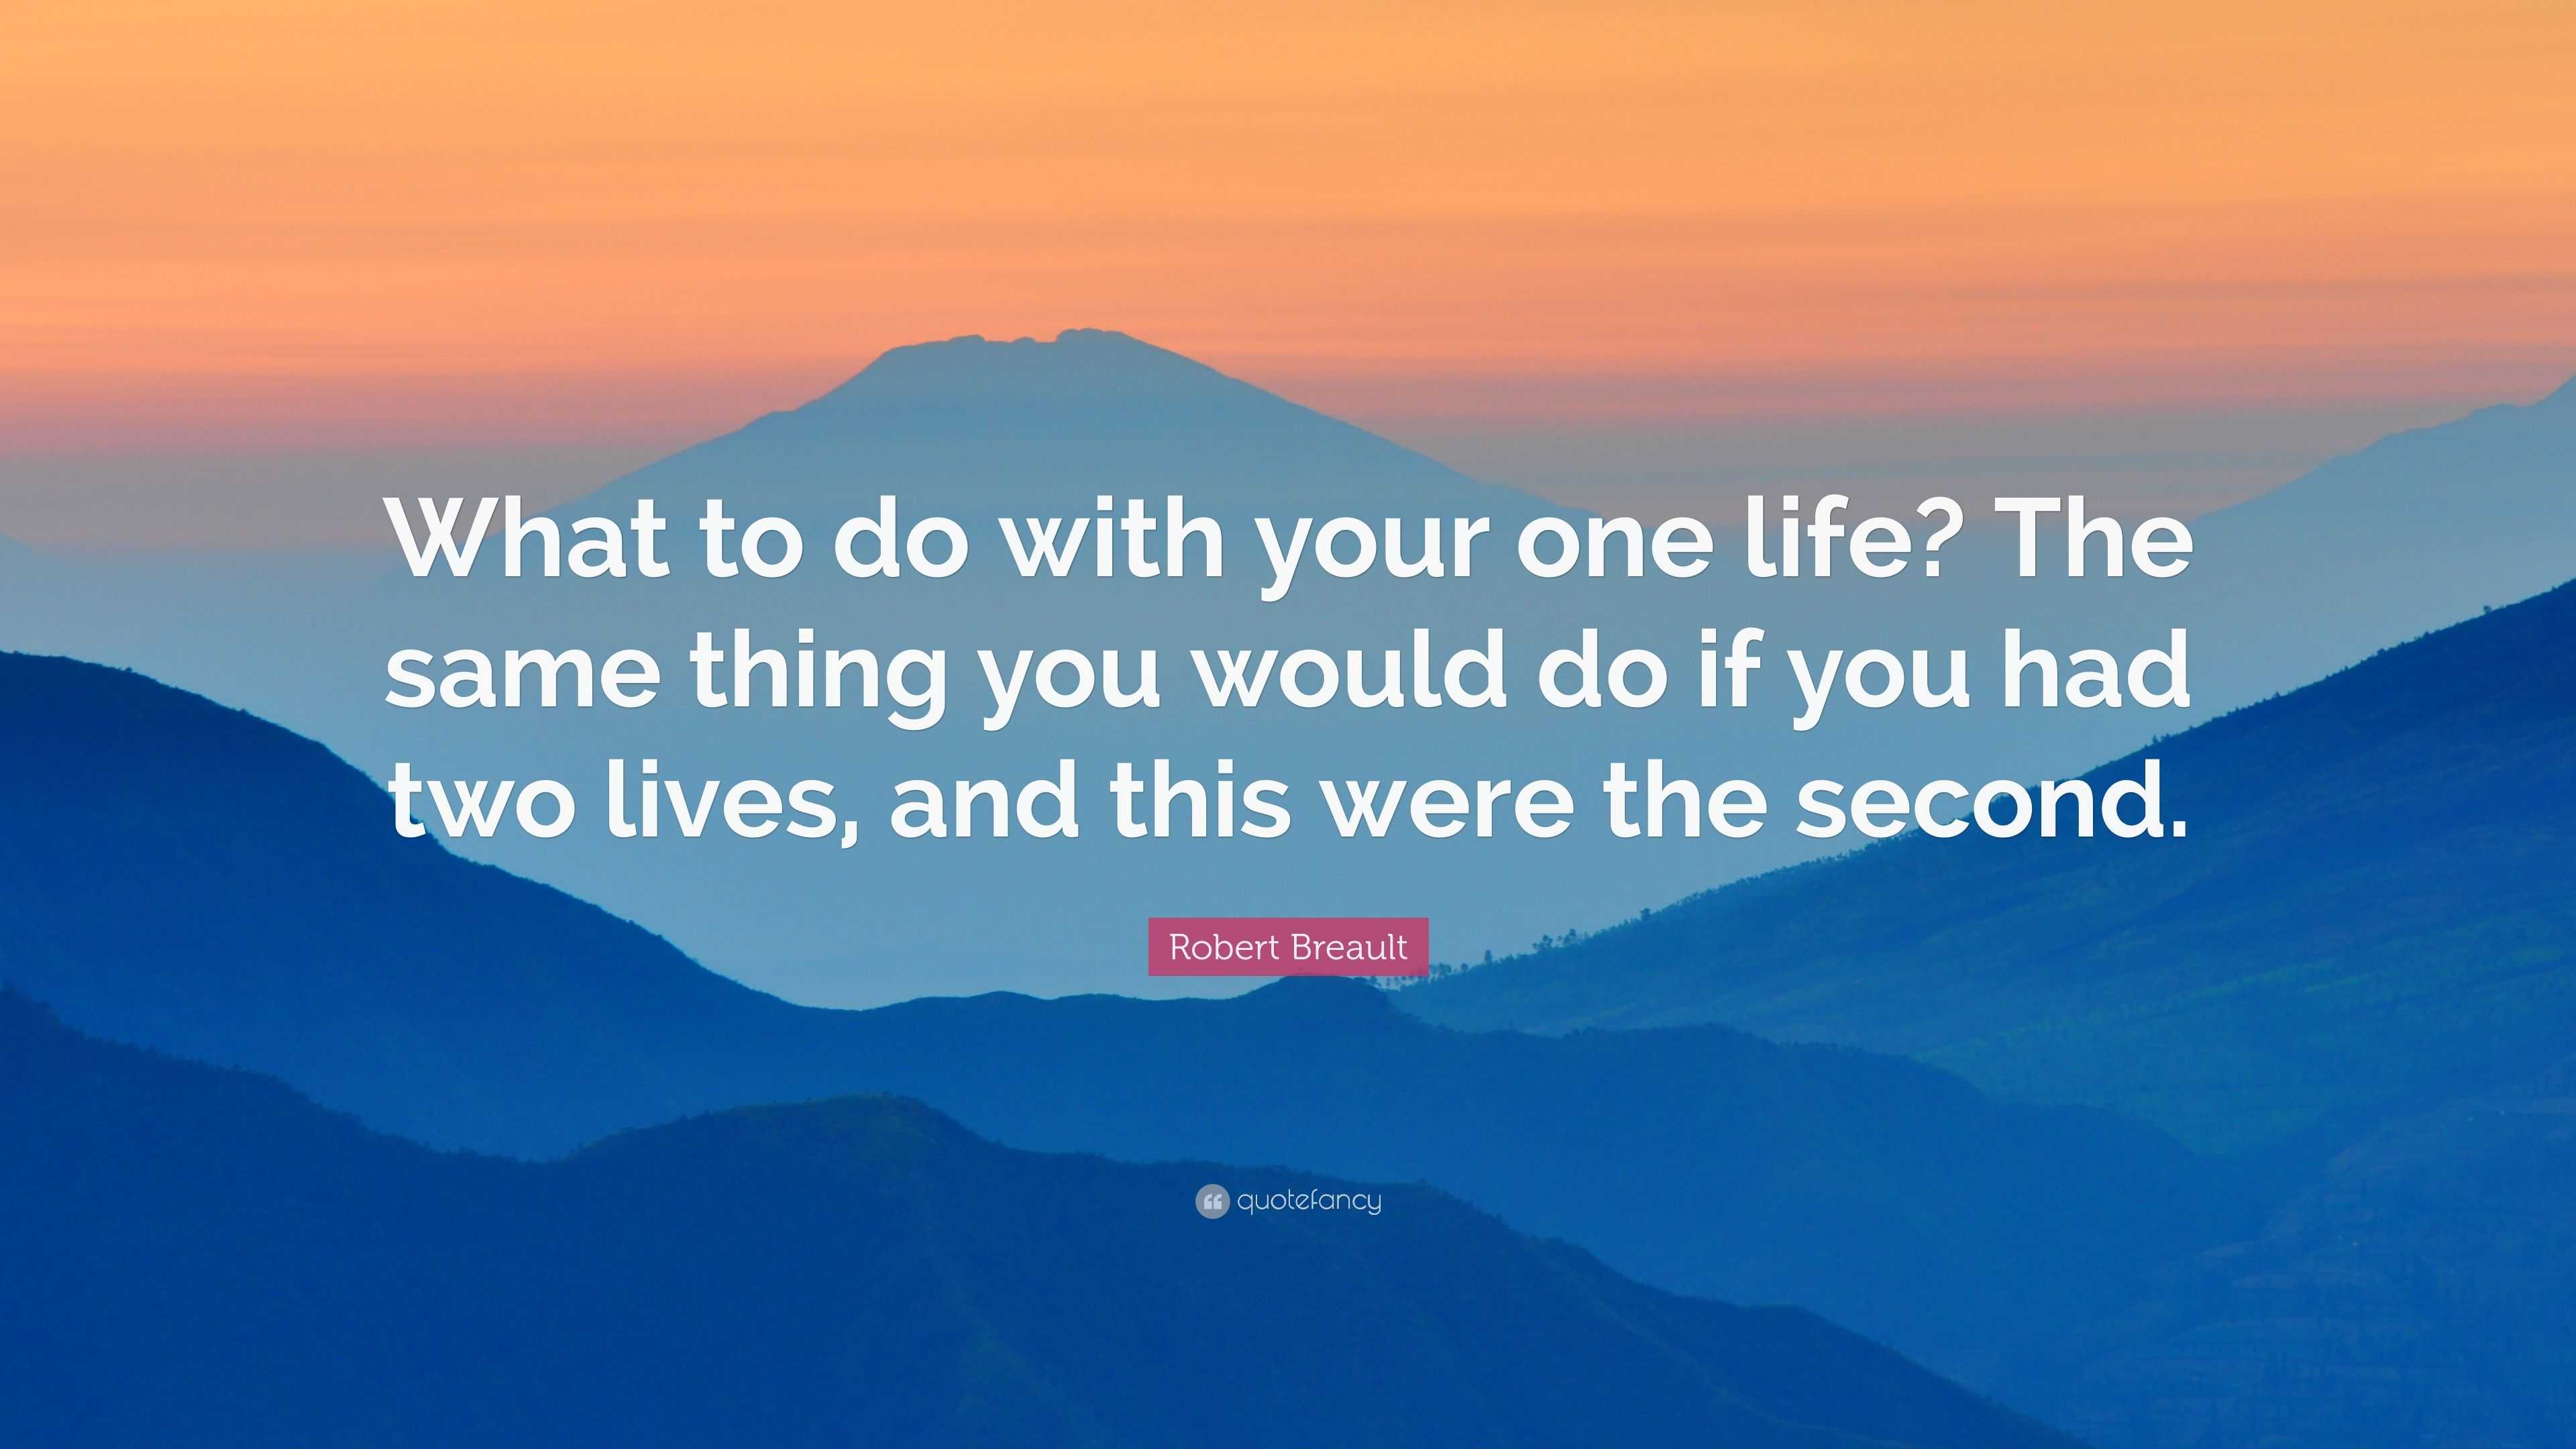 Robert Breault Quote: “What to do with your one life? The same thing ...